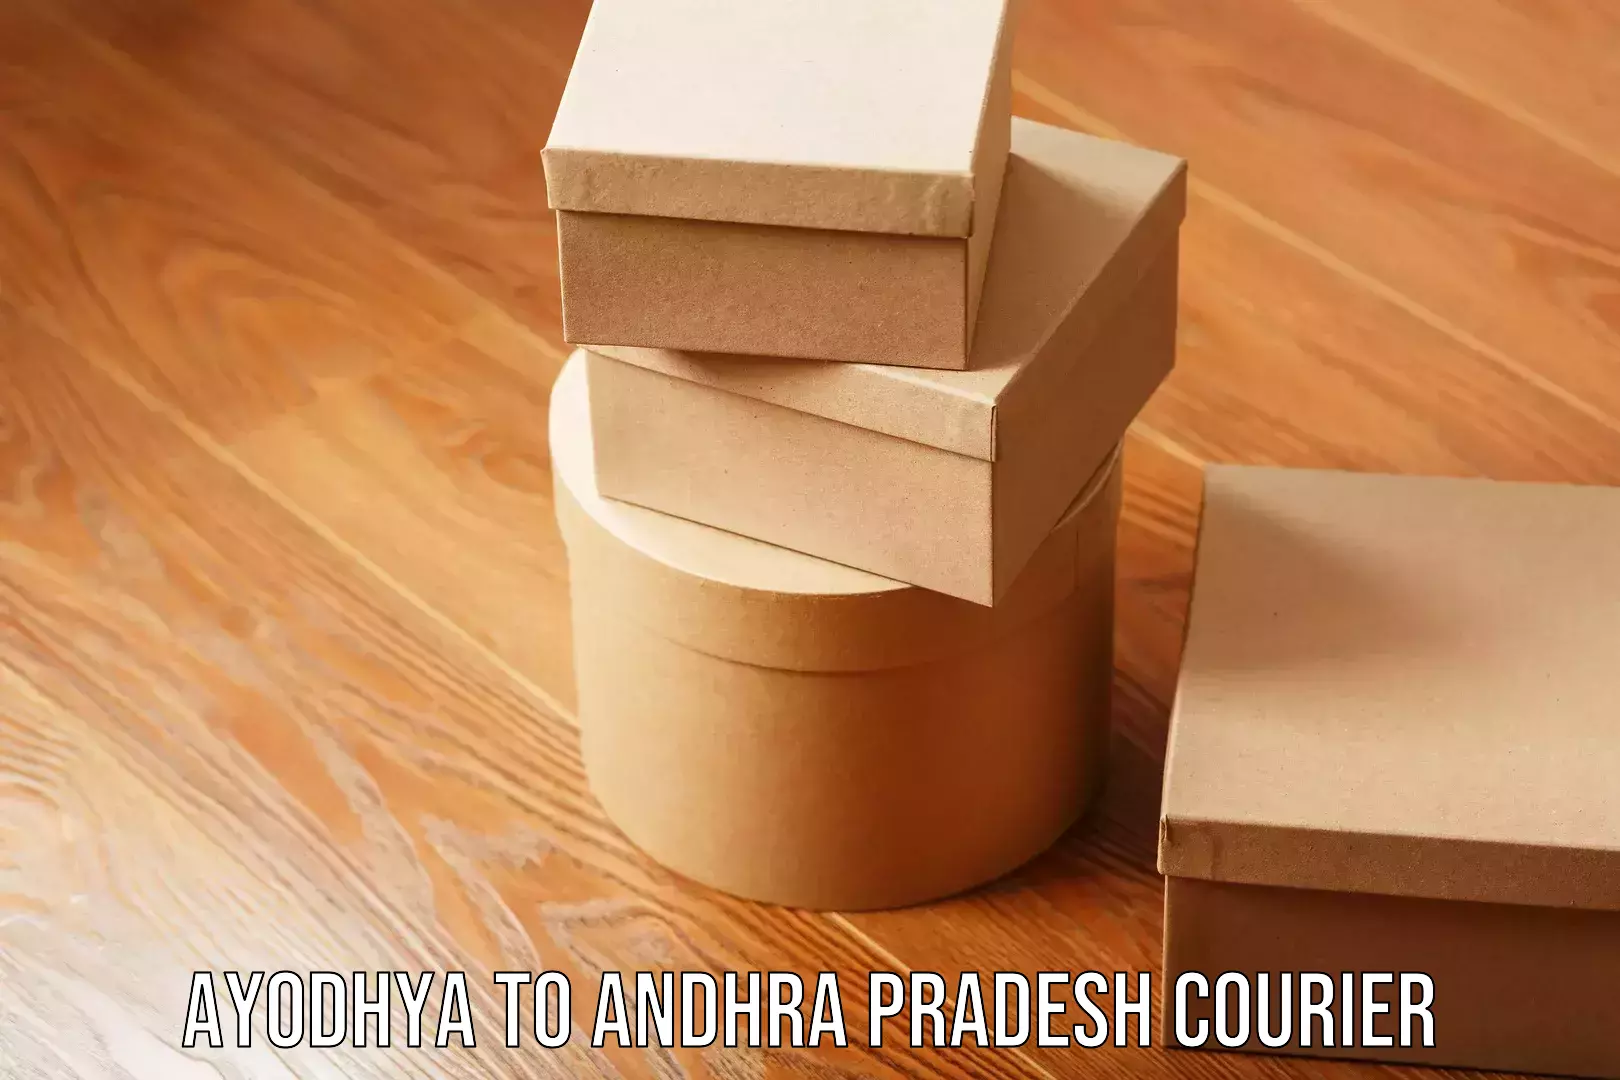 Premium courier solutions Ayodhya to Andhra Pradesh